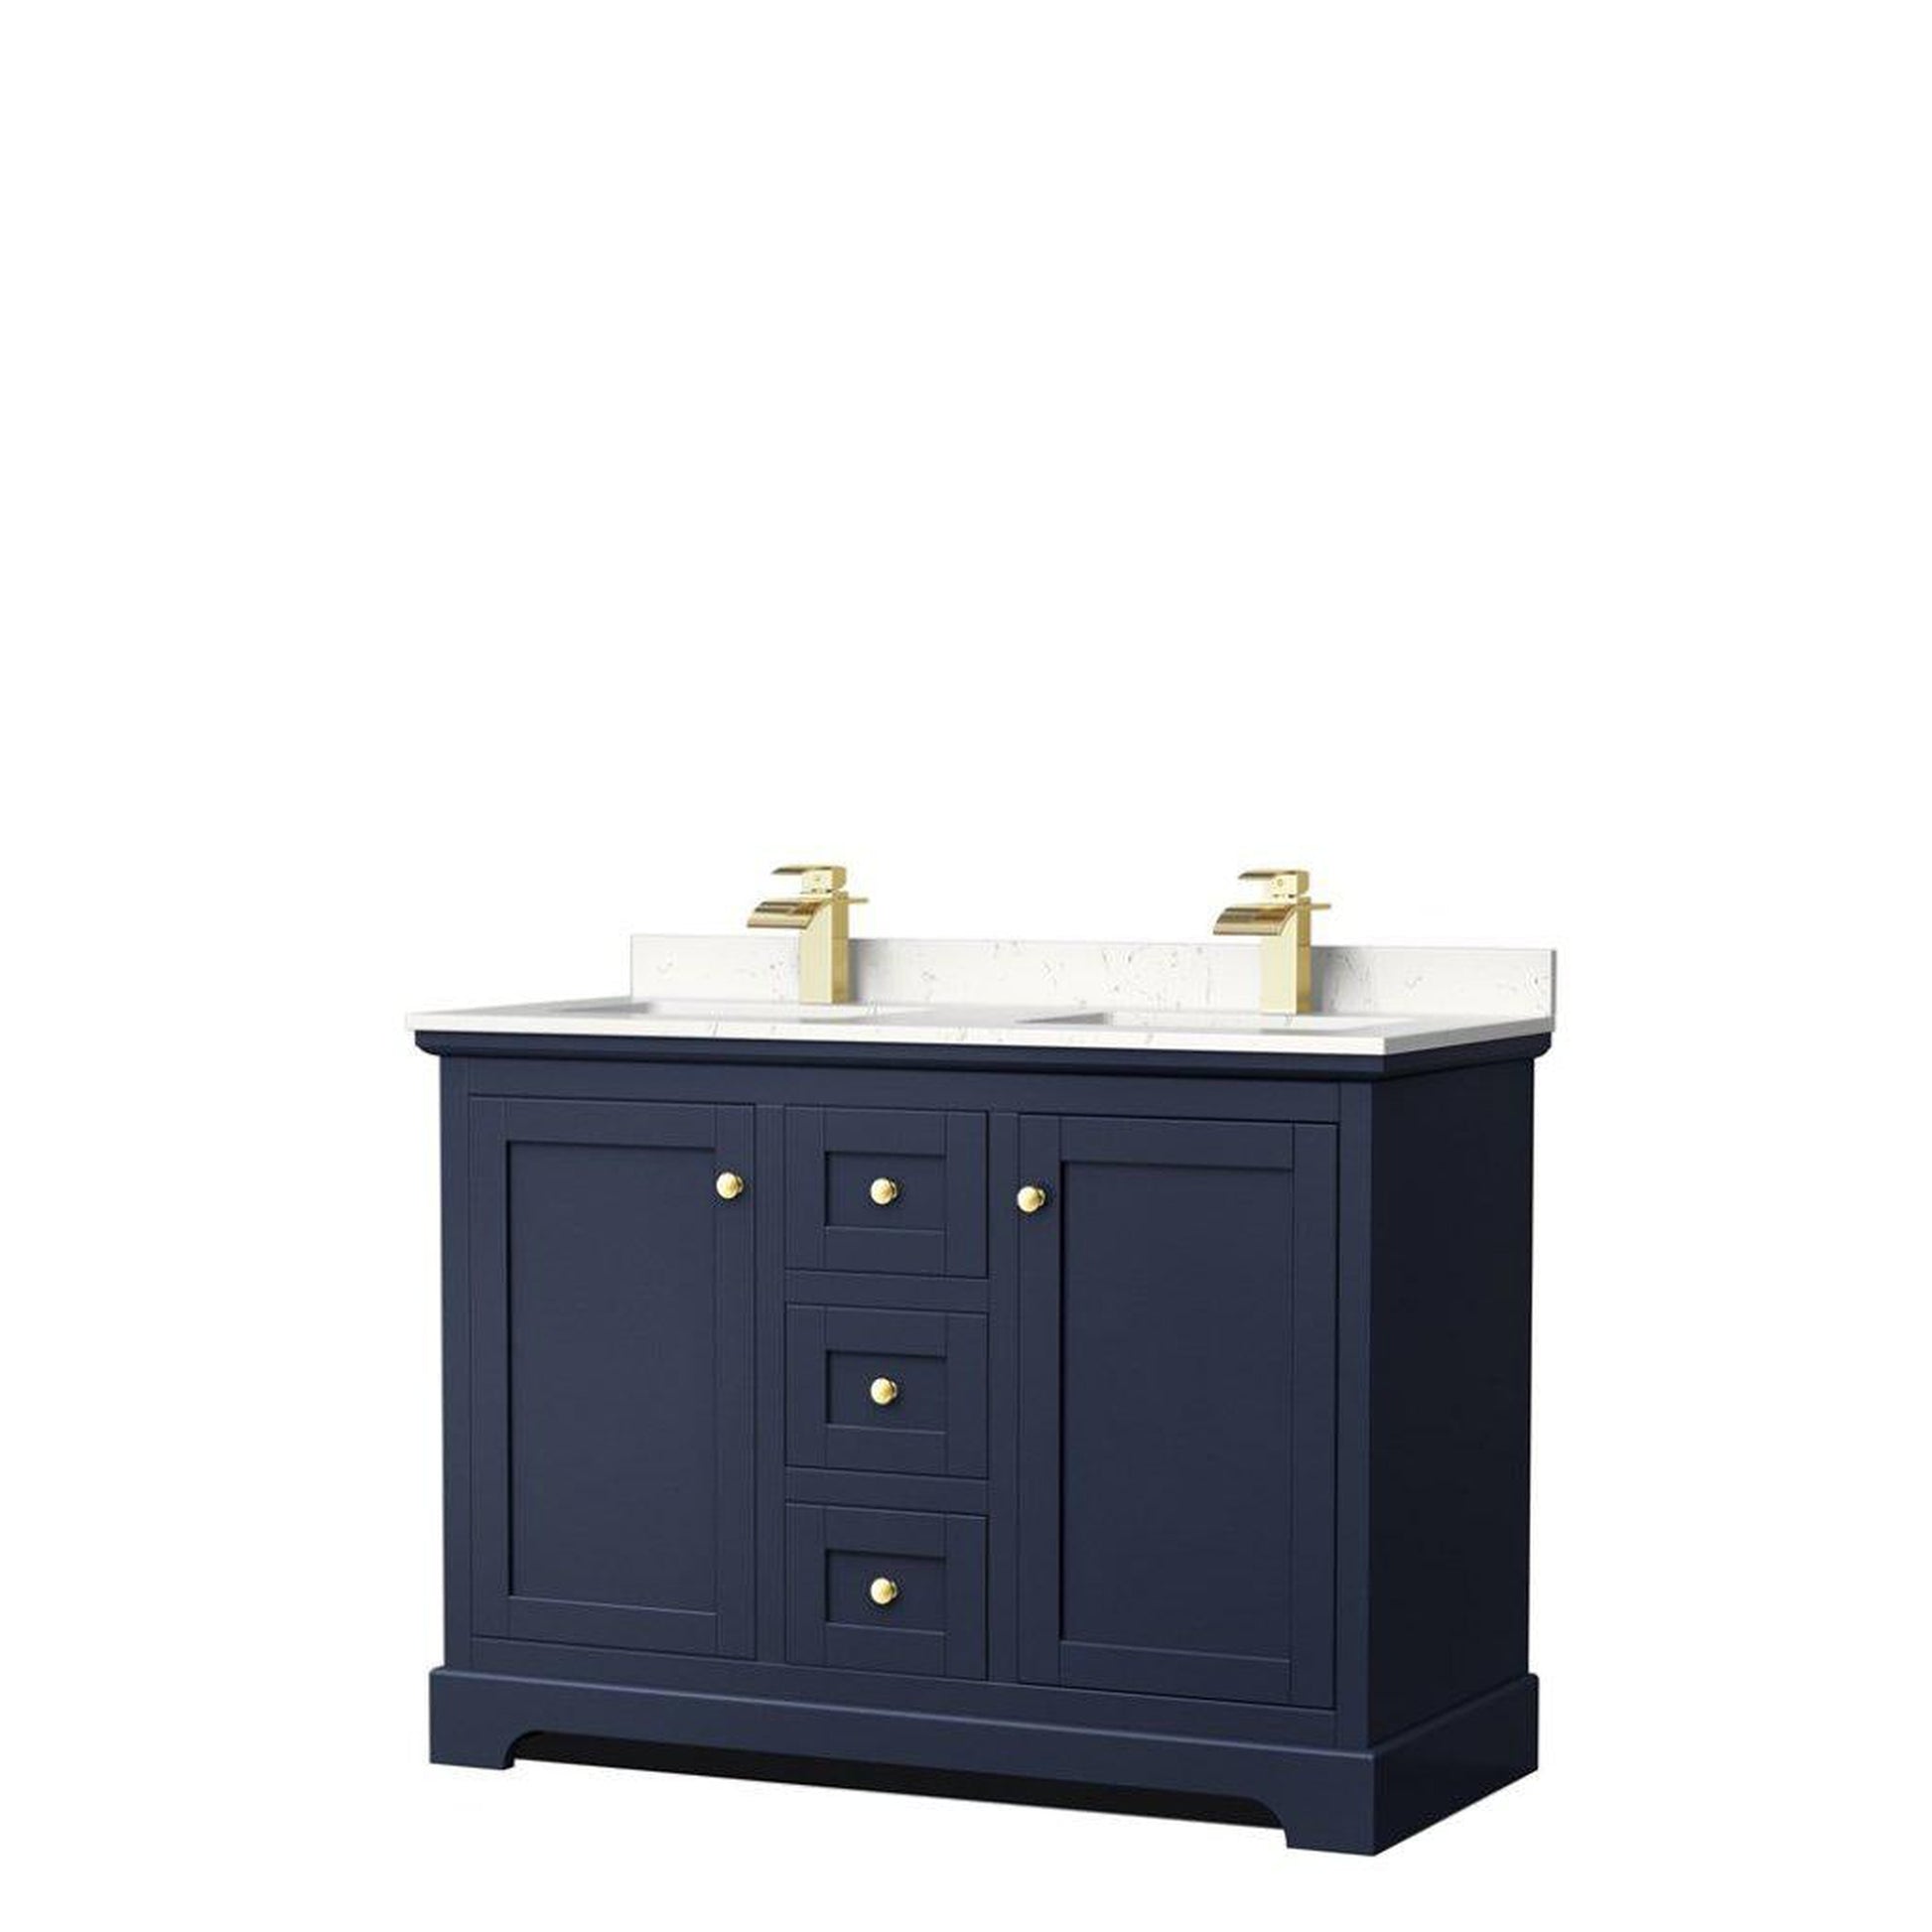 Wyndham Collection Avery 48" Dark Blue Double Bathroom Vanity With Light-Vein Cultured Marble Countertop With 1-Hole Faucet And Square Sink